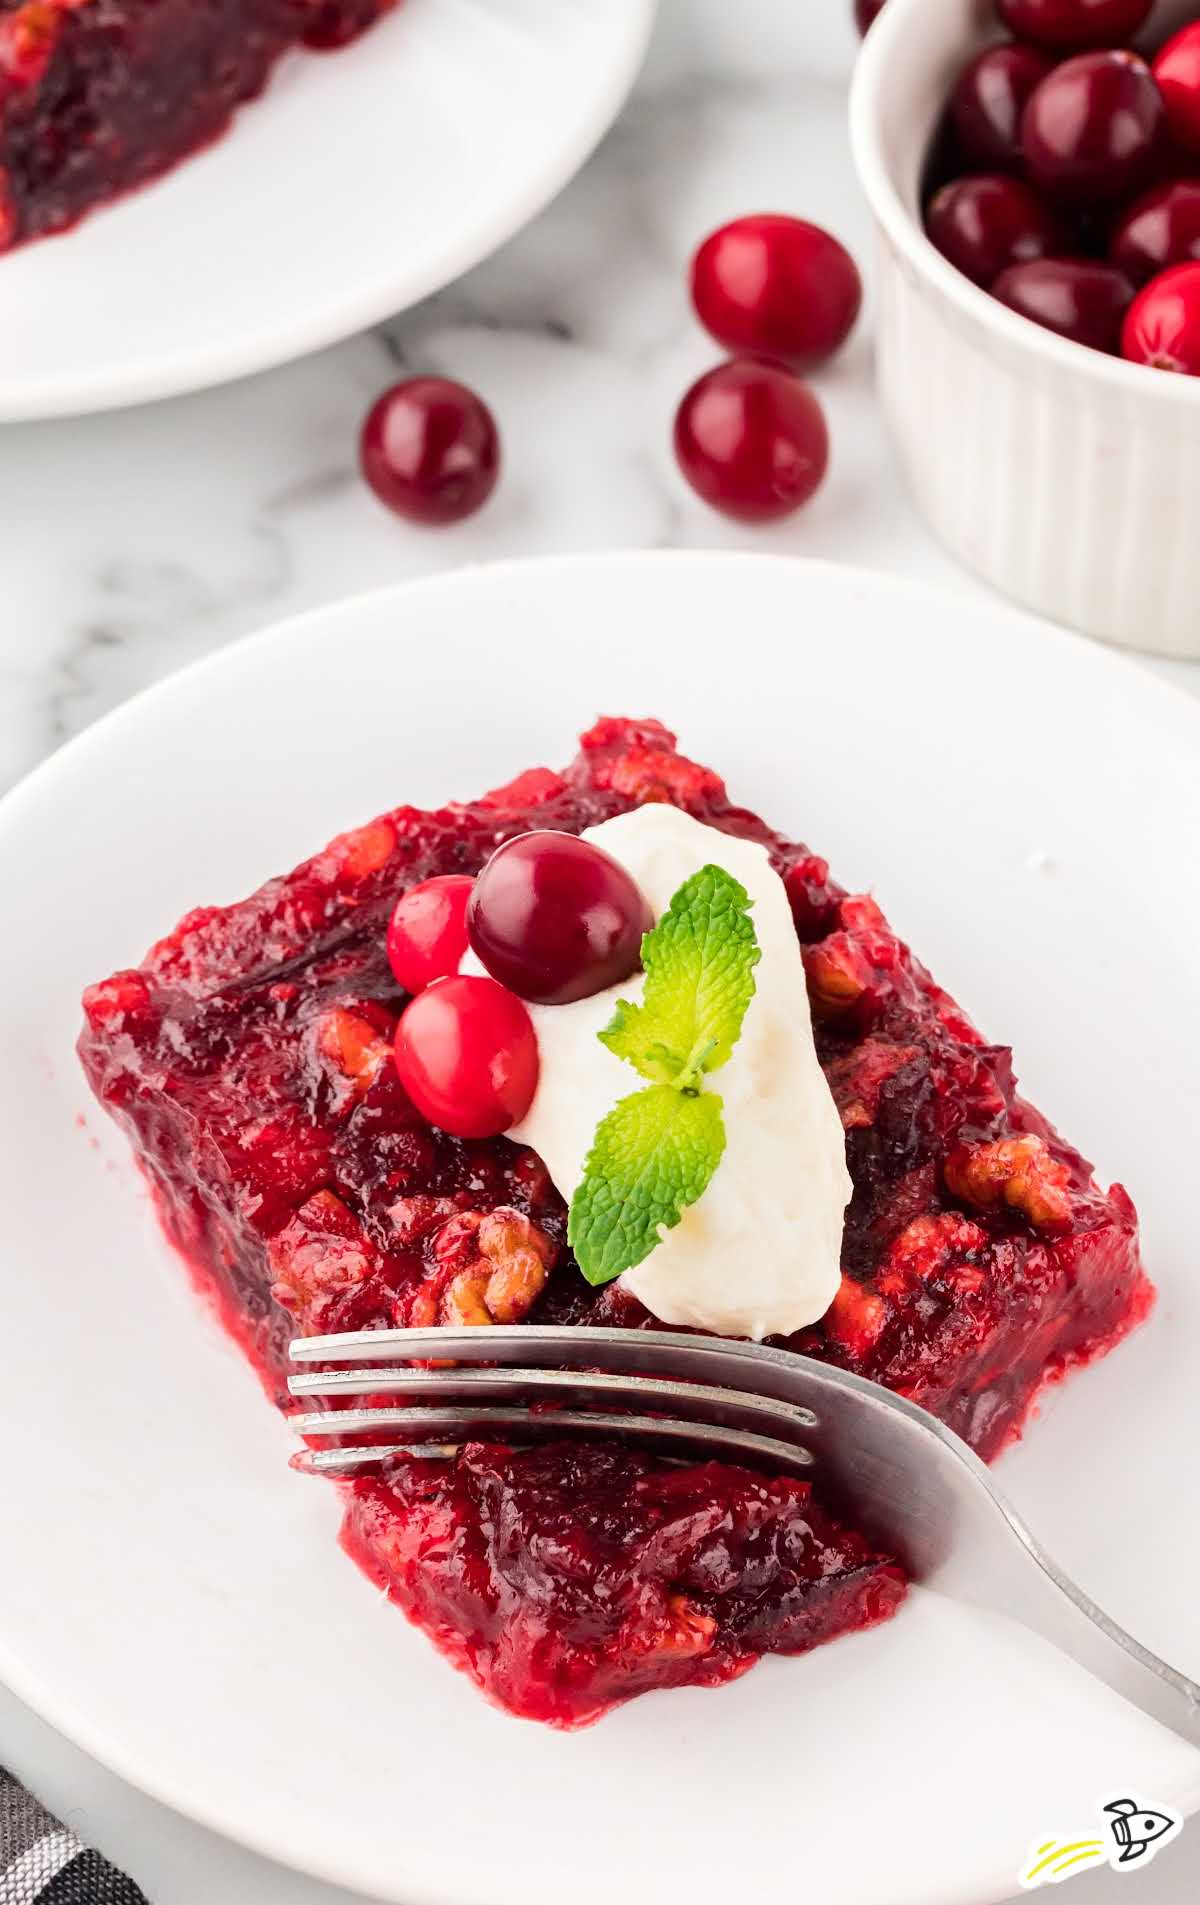 a close up shot of a piece of Cranberry Jello Salad with a fork grabbing a piece